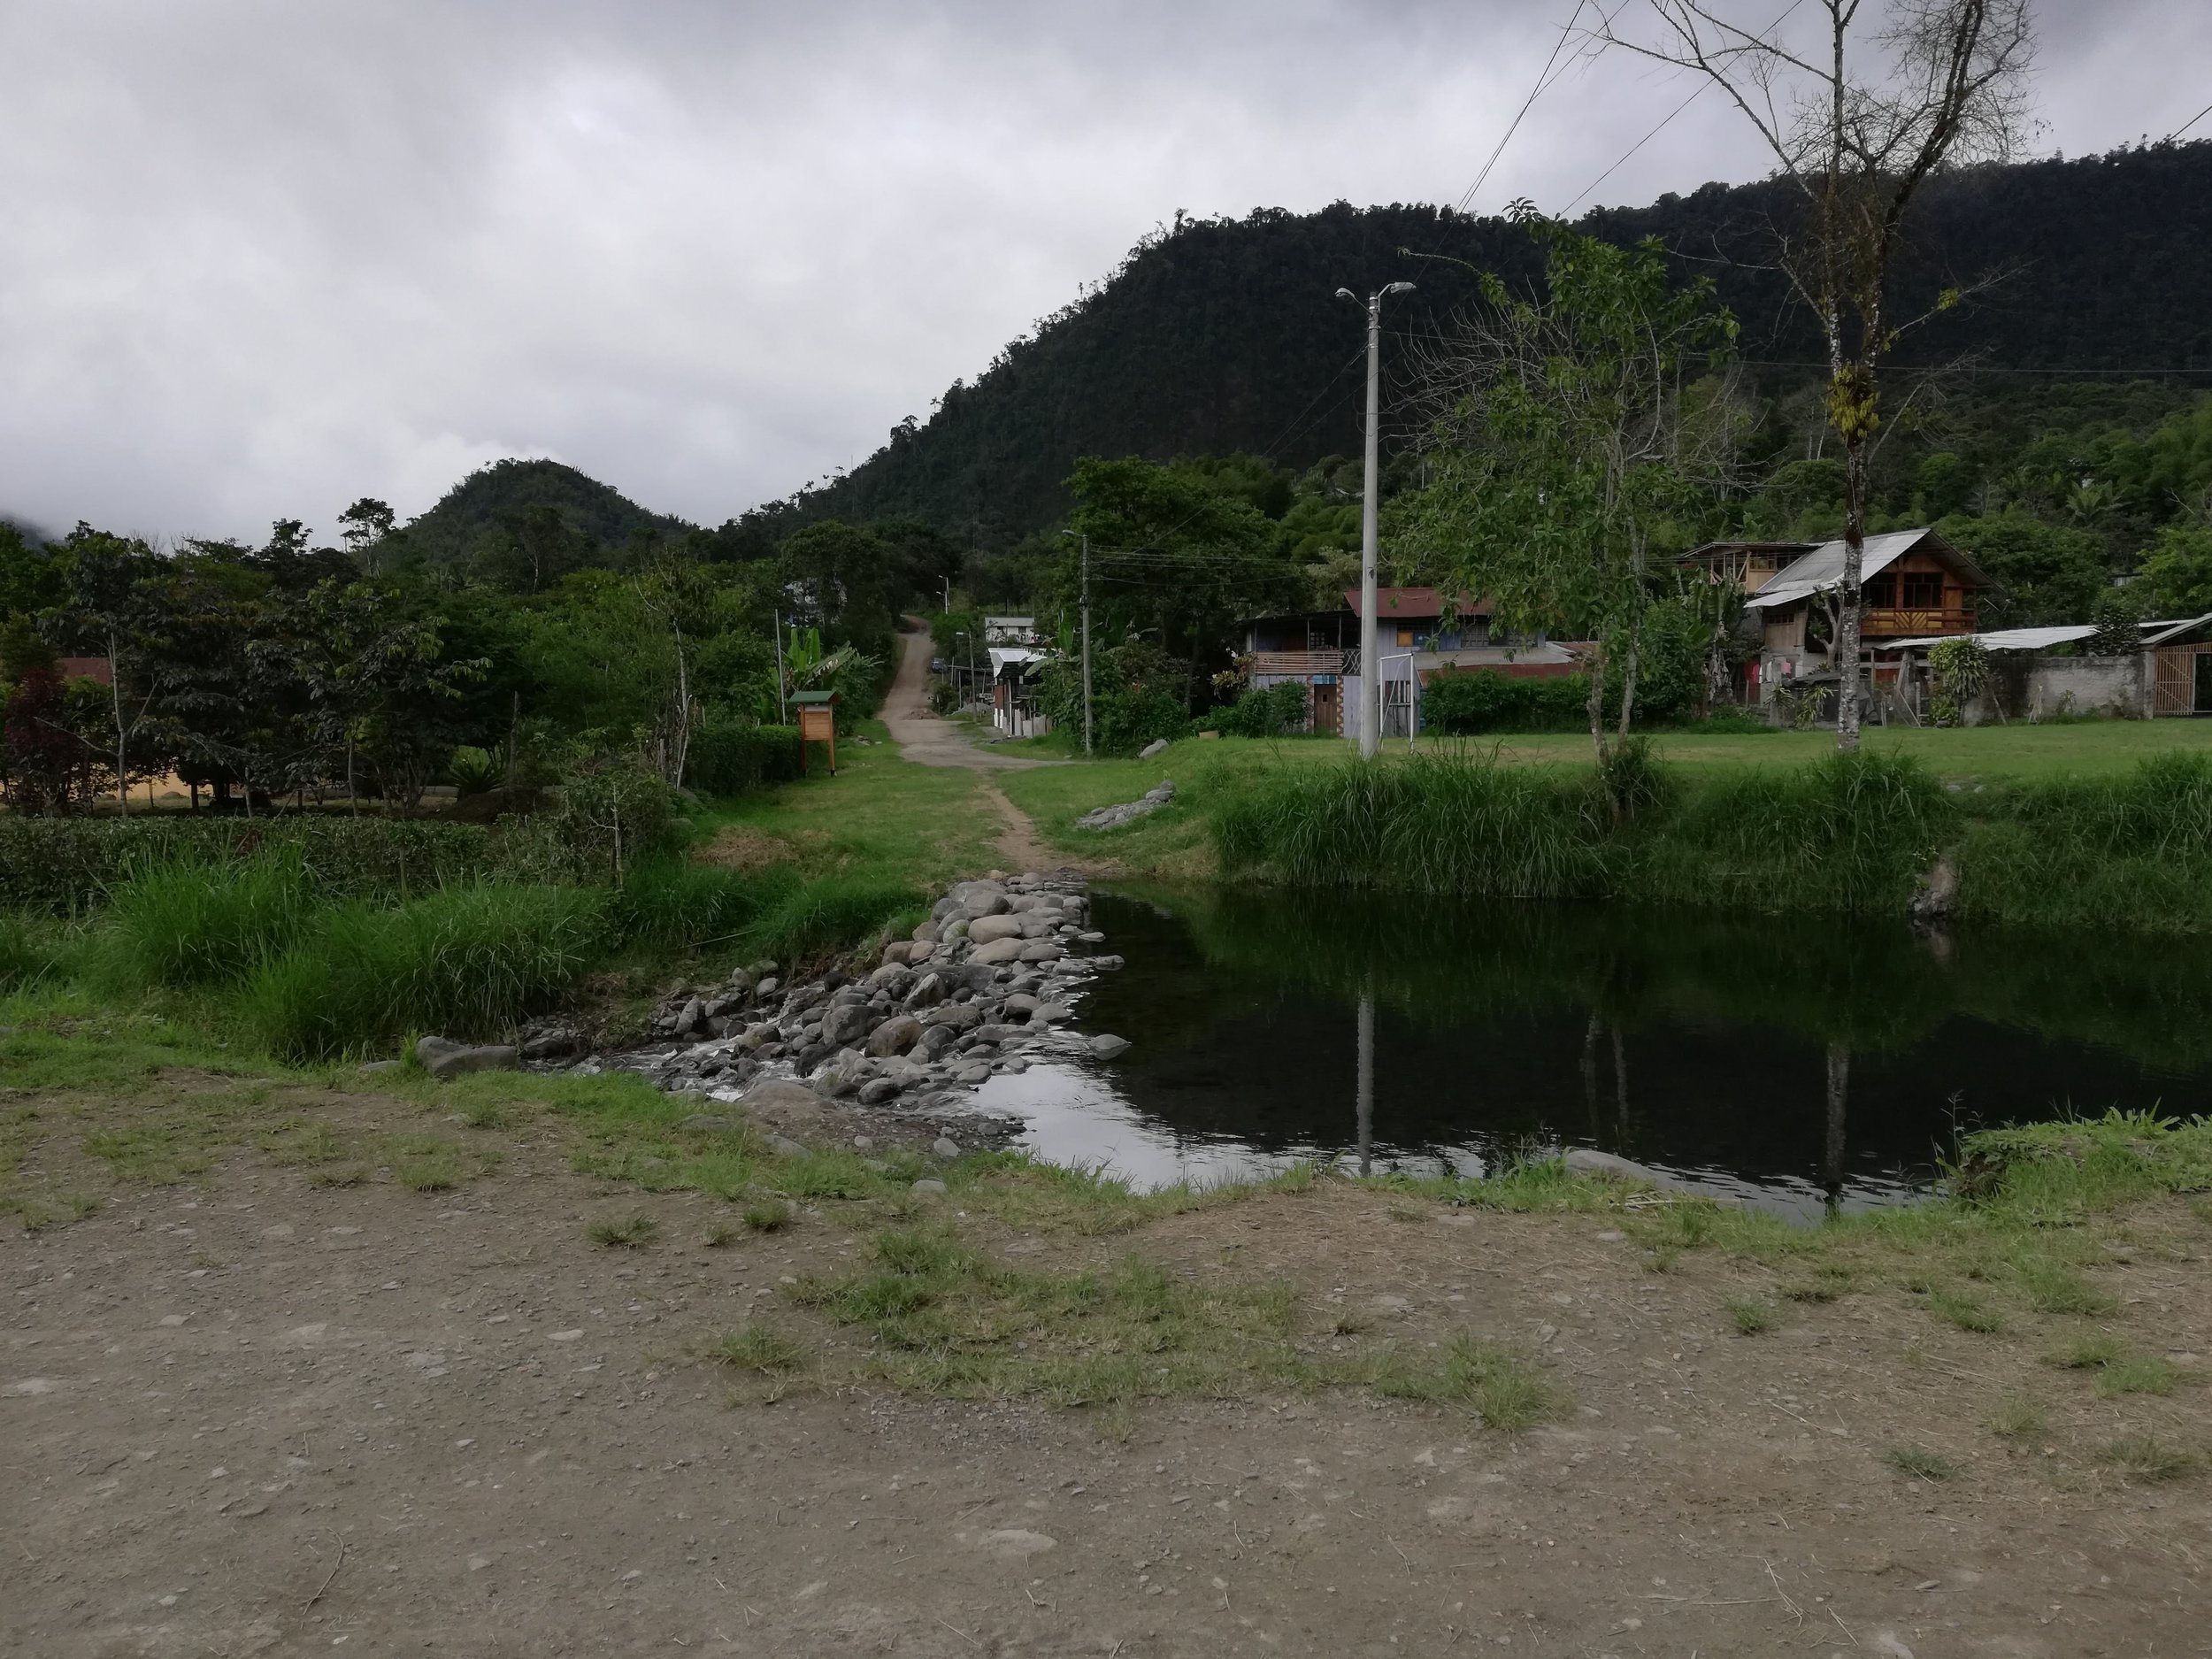  Near the hotel, there’s a river that has a natural pool. I try to hop in there whenever I can after a hot day. Mornings are sunny, while in the current rain season, afternoons are overcast or rainy. 